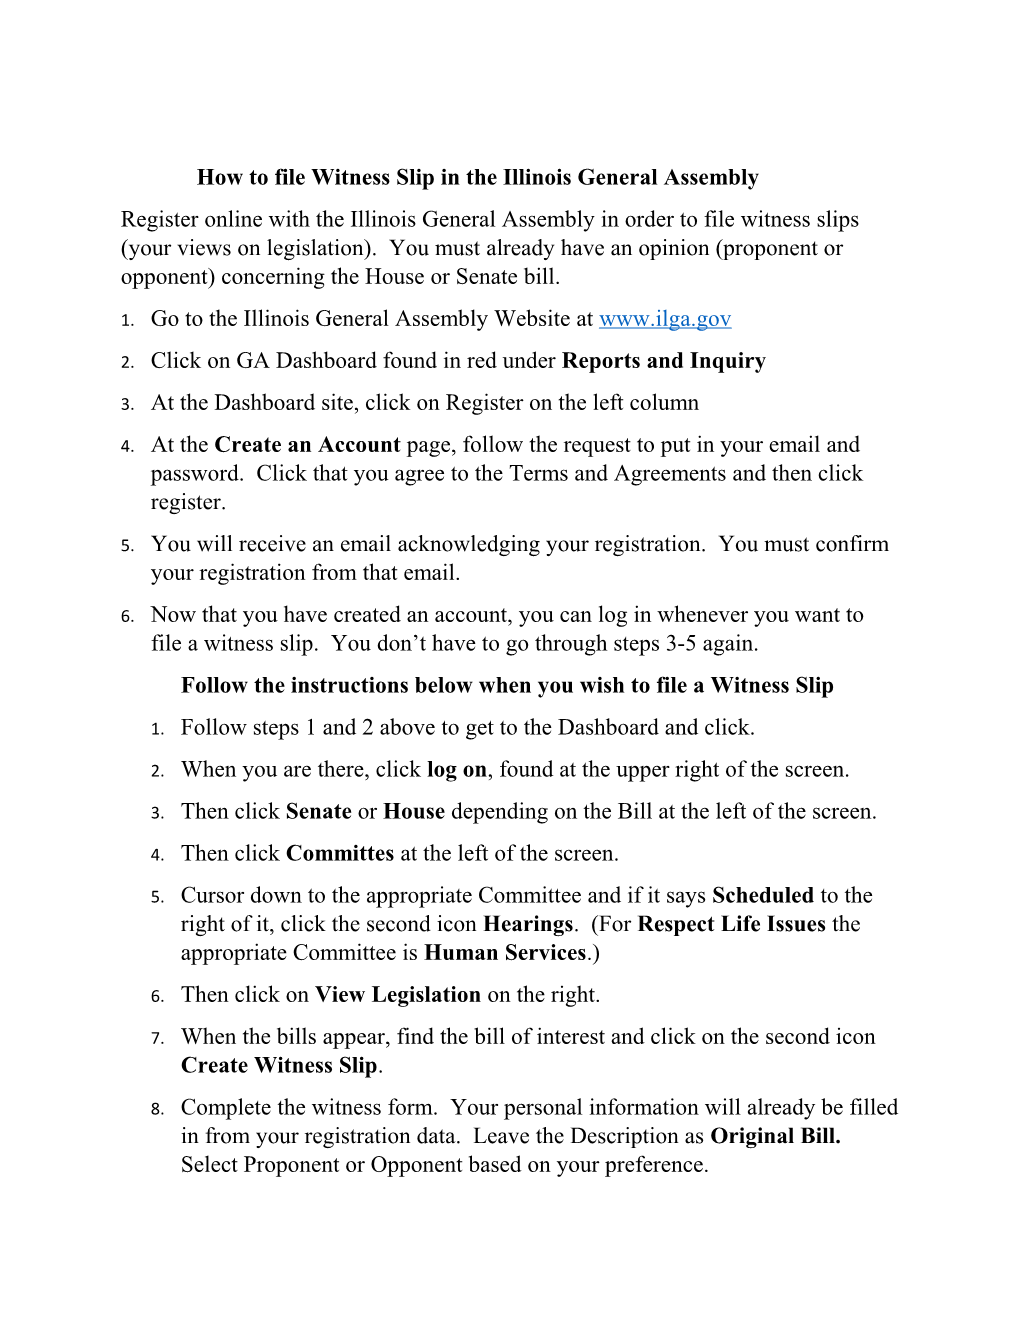 How to File Witness Slip in the Illinois General Assembly